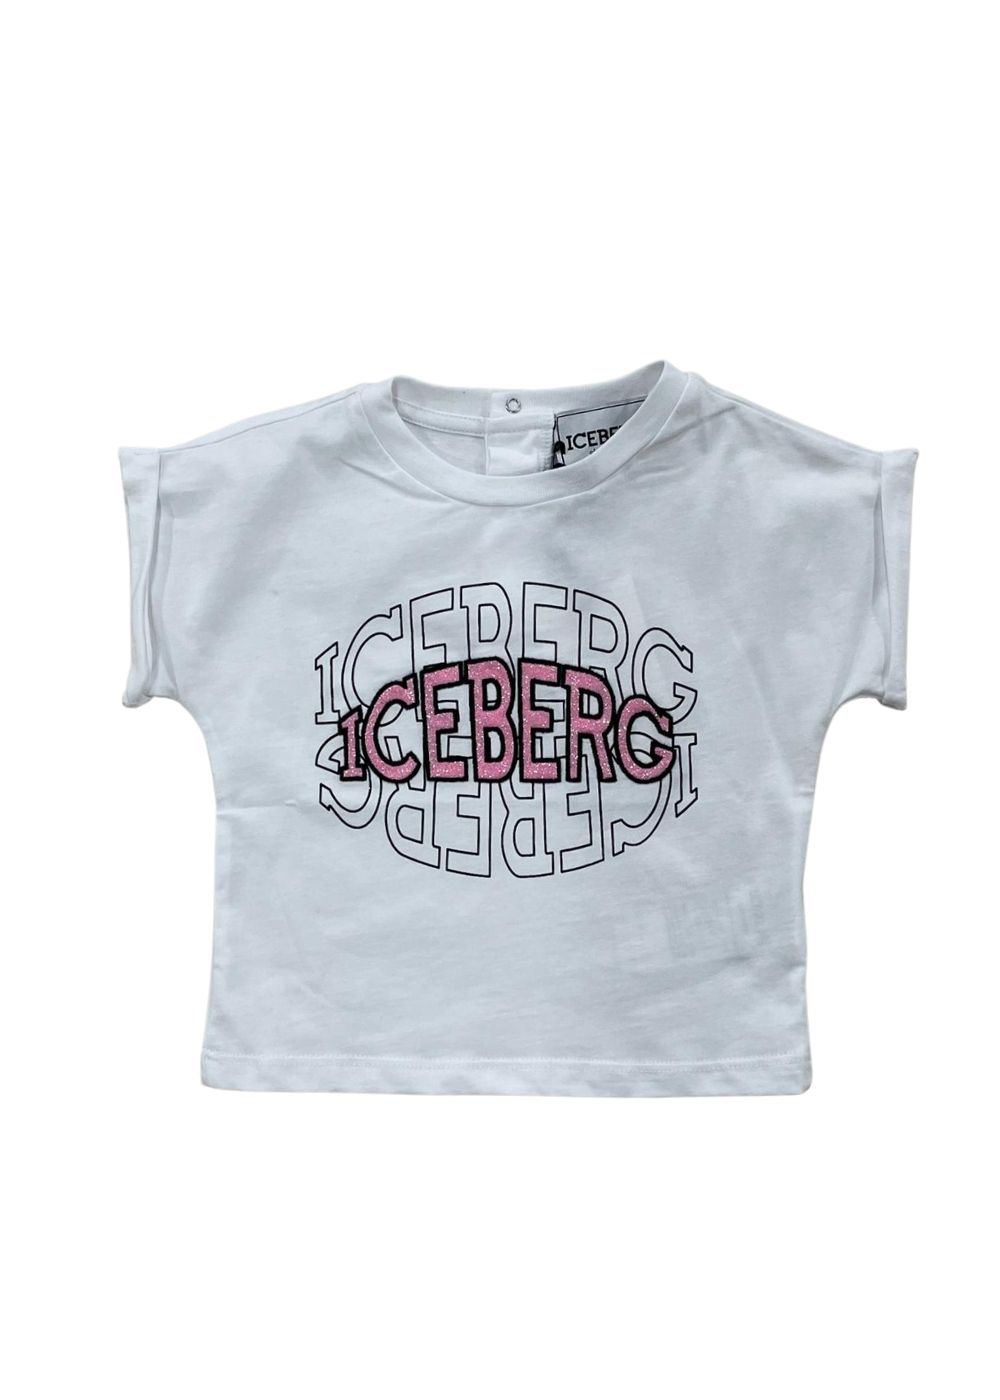 Featured image for “Iceberg T-shirt Con Stampa”